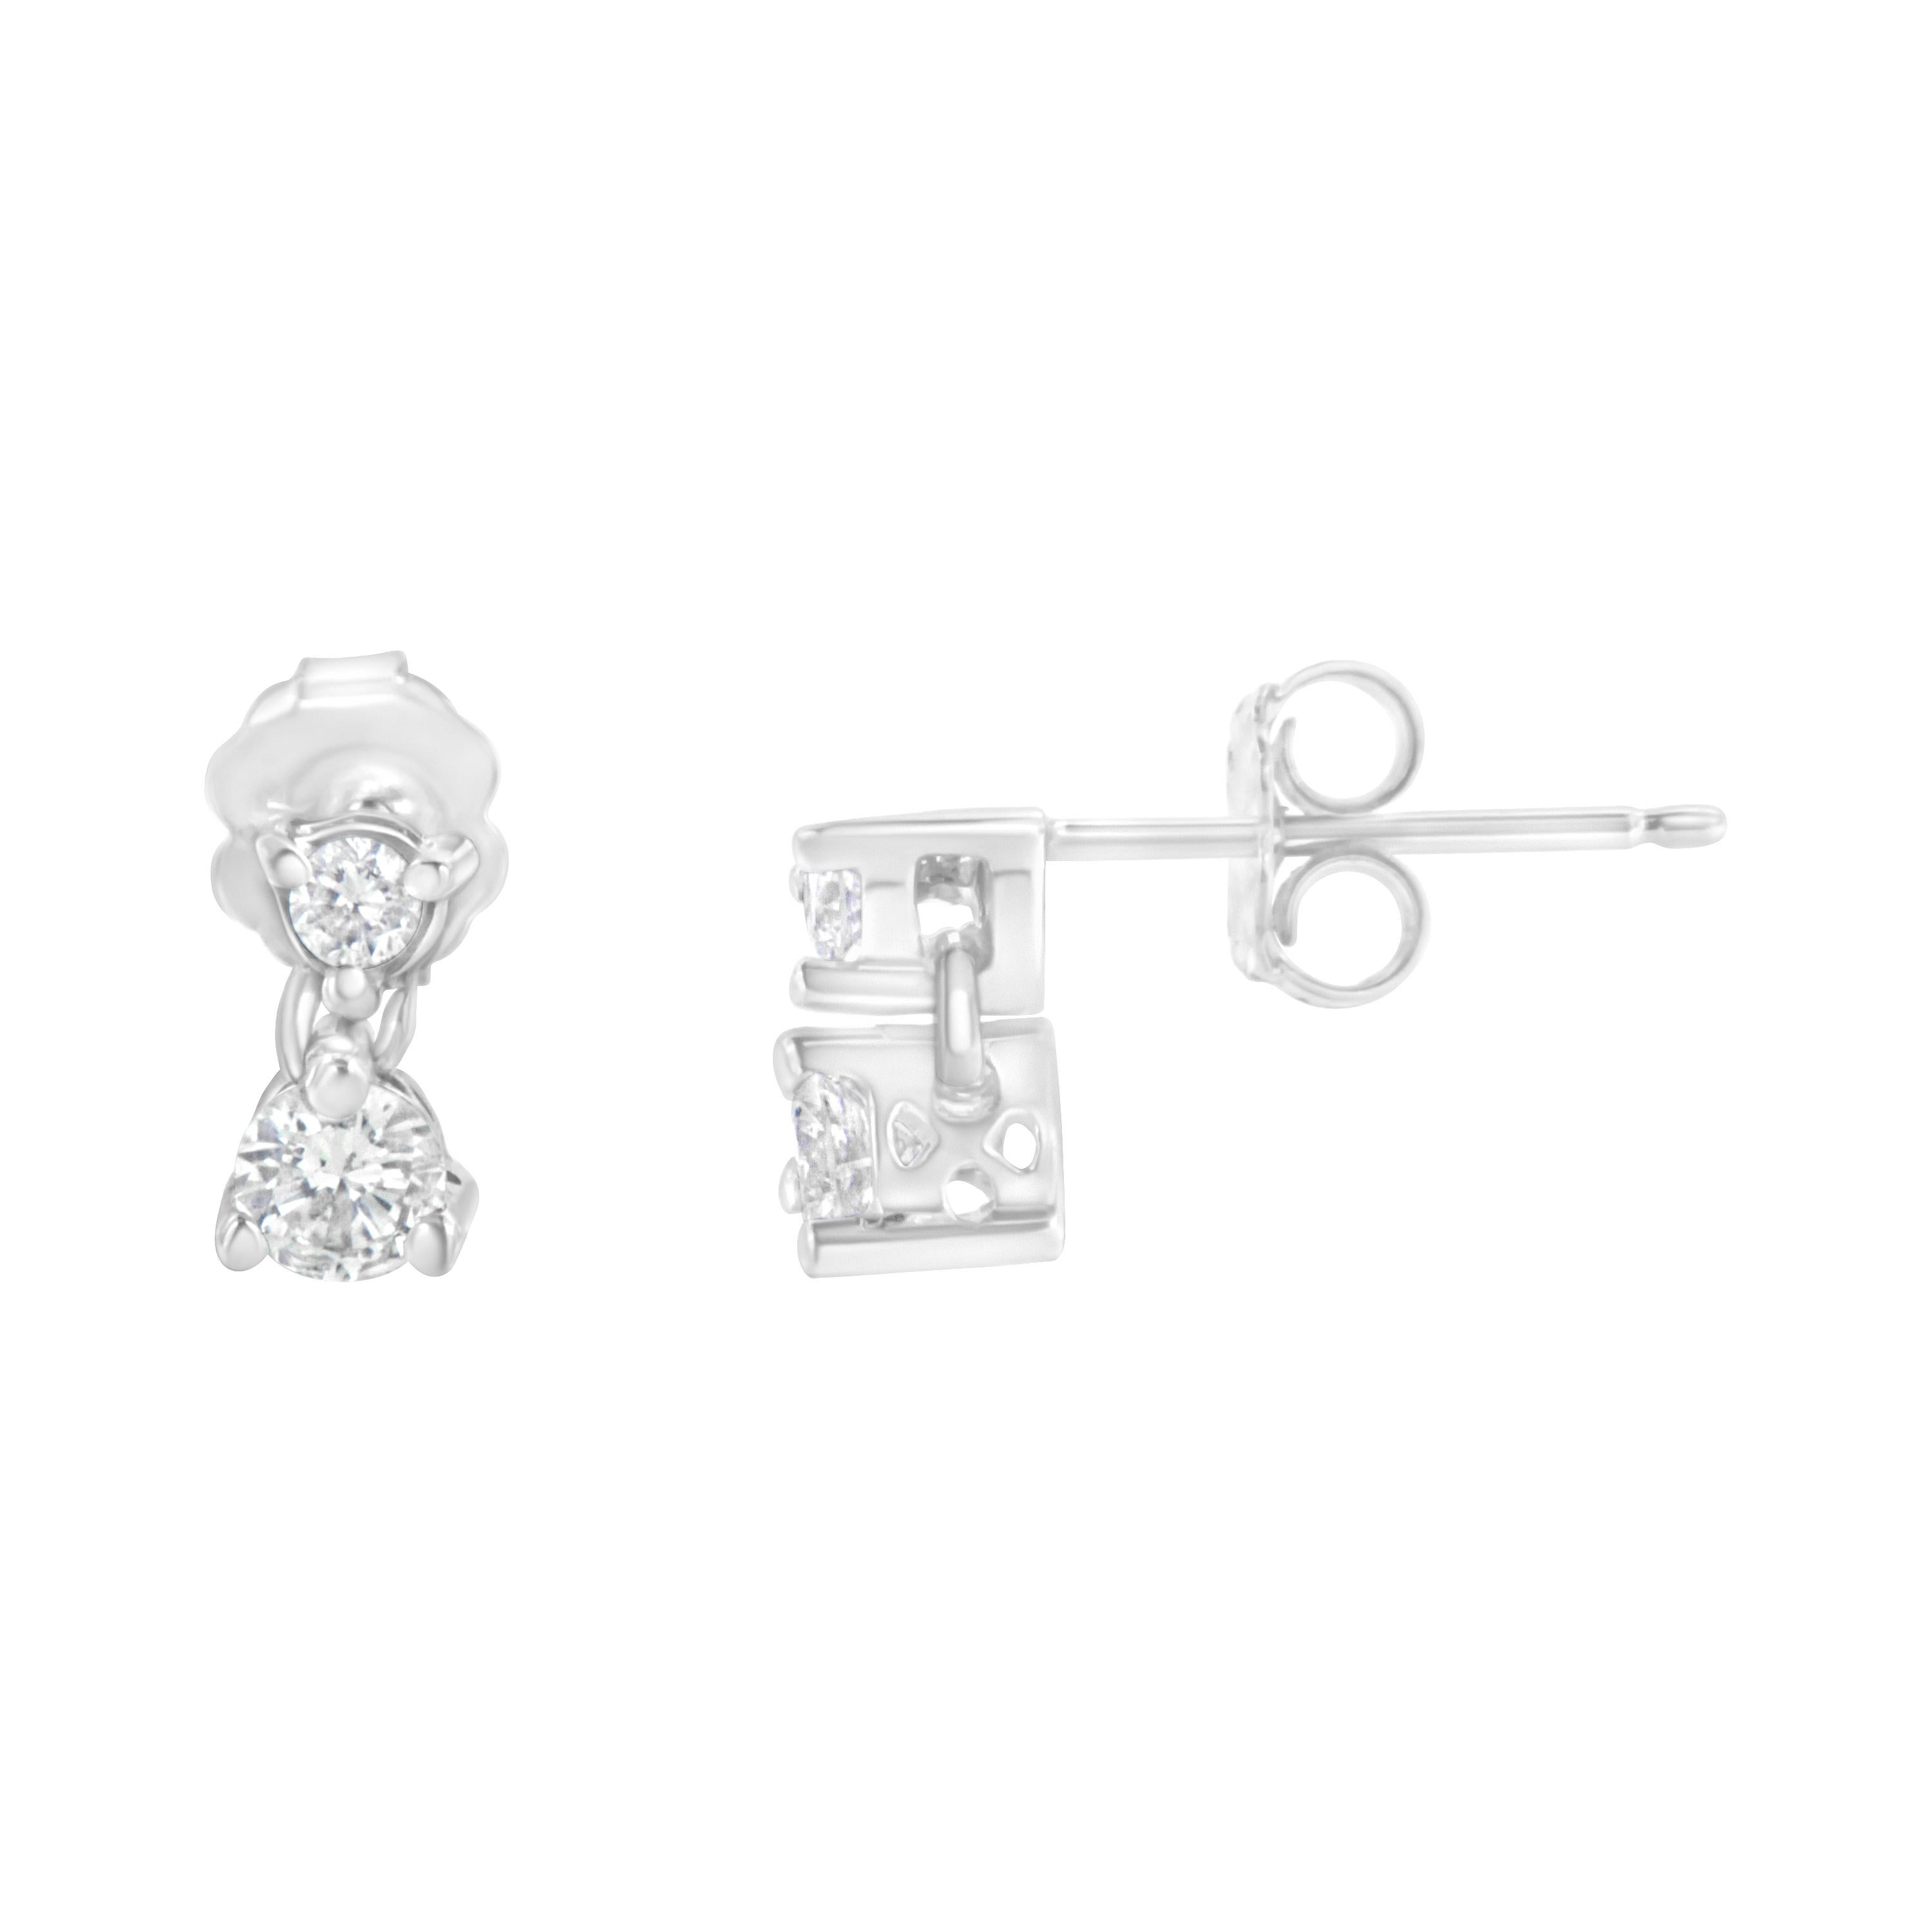 Accent your look with these chic pair of 1 ct tdw stud earrings. Composed of precious 14k white gold, these gorgeous earrings are finely polished to shine. Further, the embellishment with flickering round cut diamonds in a prong setting giving this